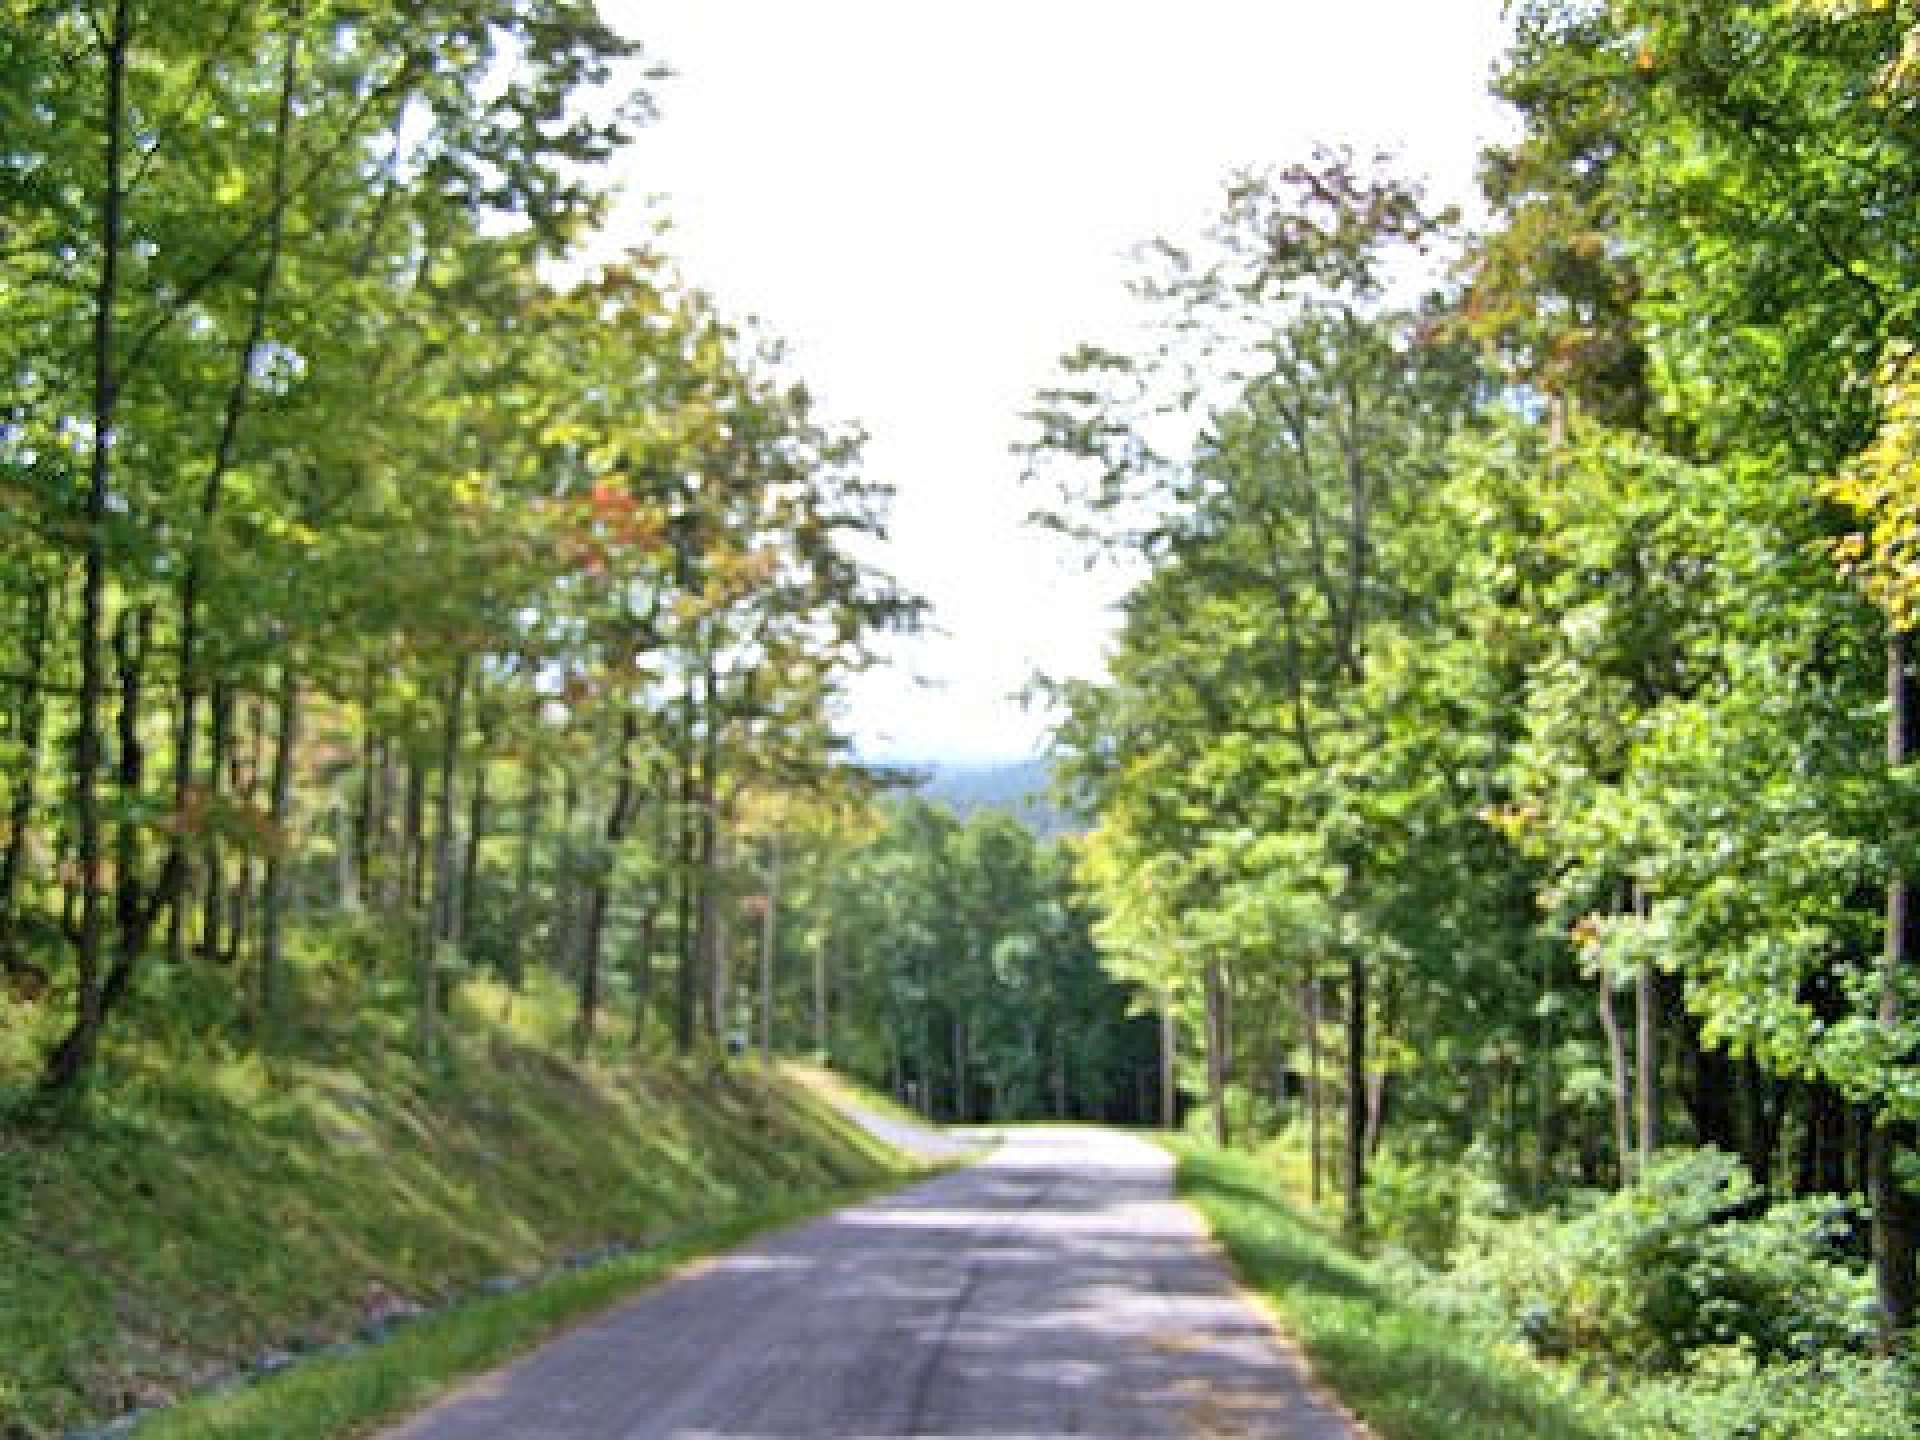 Beautifully wooded home sites with paved streets winding through tall trees and native mountain foliage offer seasonal views.